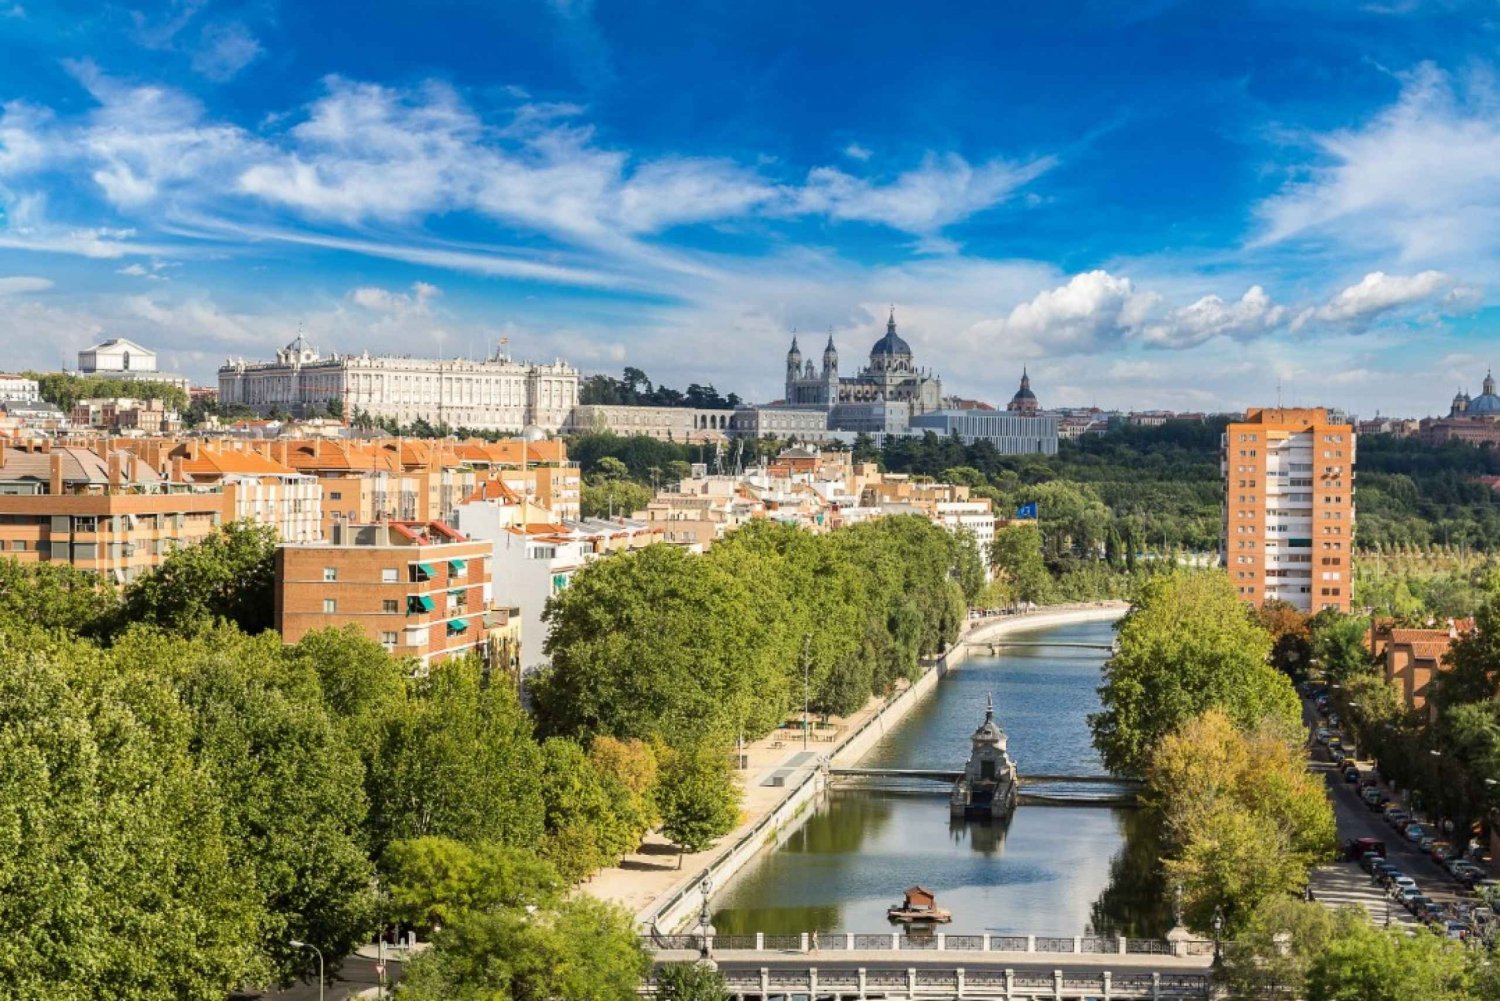 Madrid's Golden Age: Manzanares River Self Guided Audio Tour